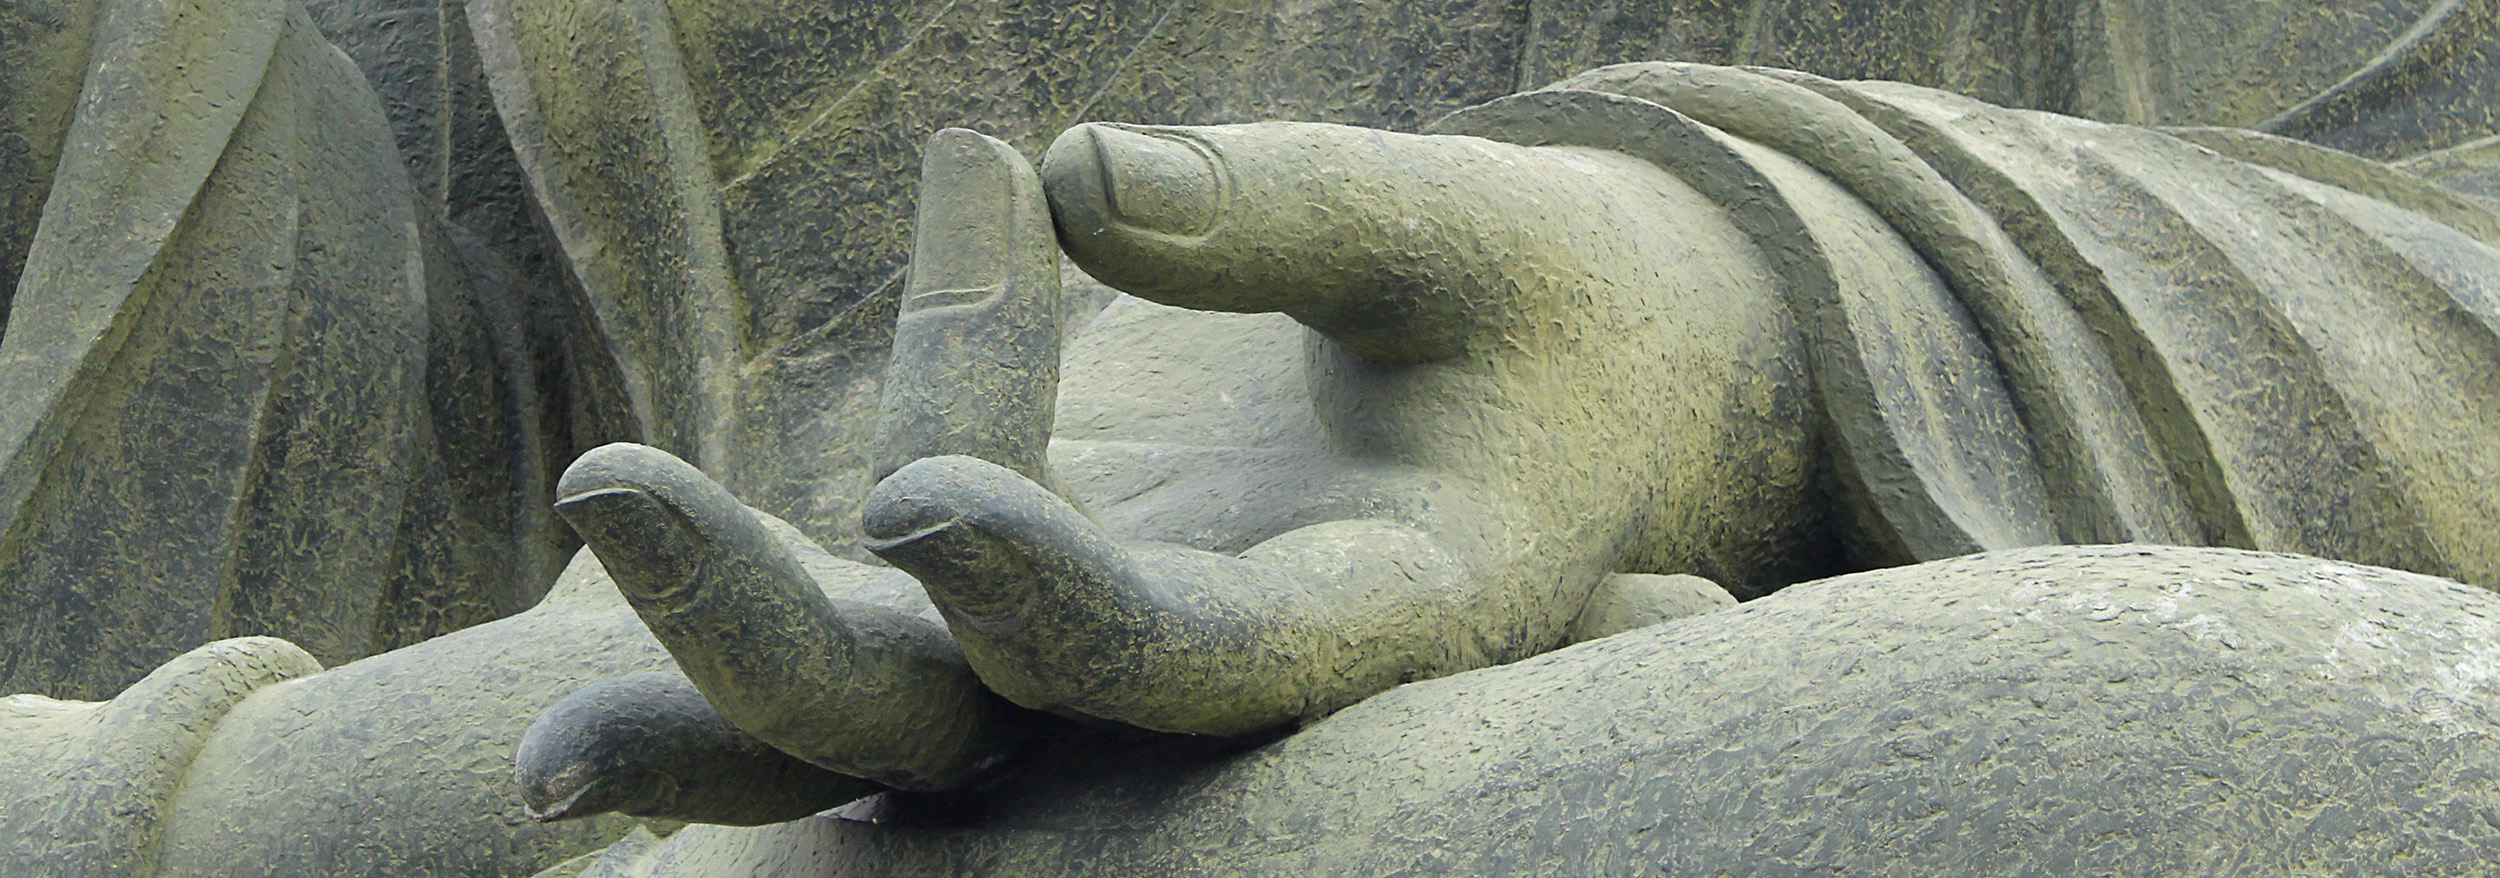 An image of a mudra (hand gesture) depicting the thumb touching the tip of the ring finger.